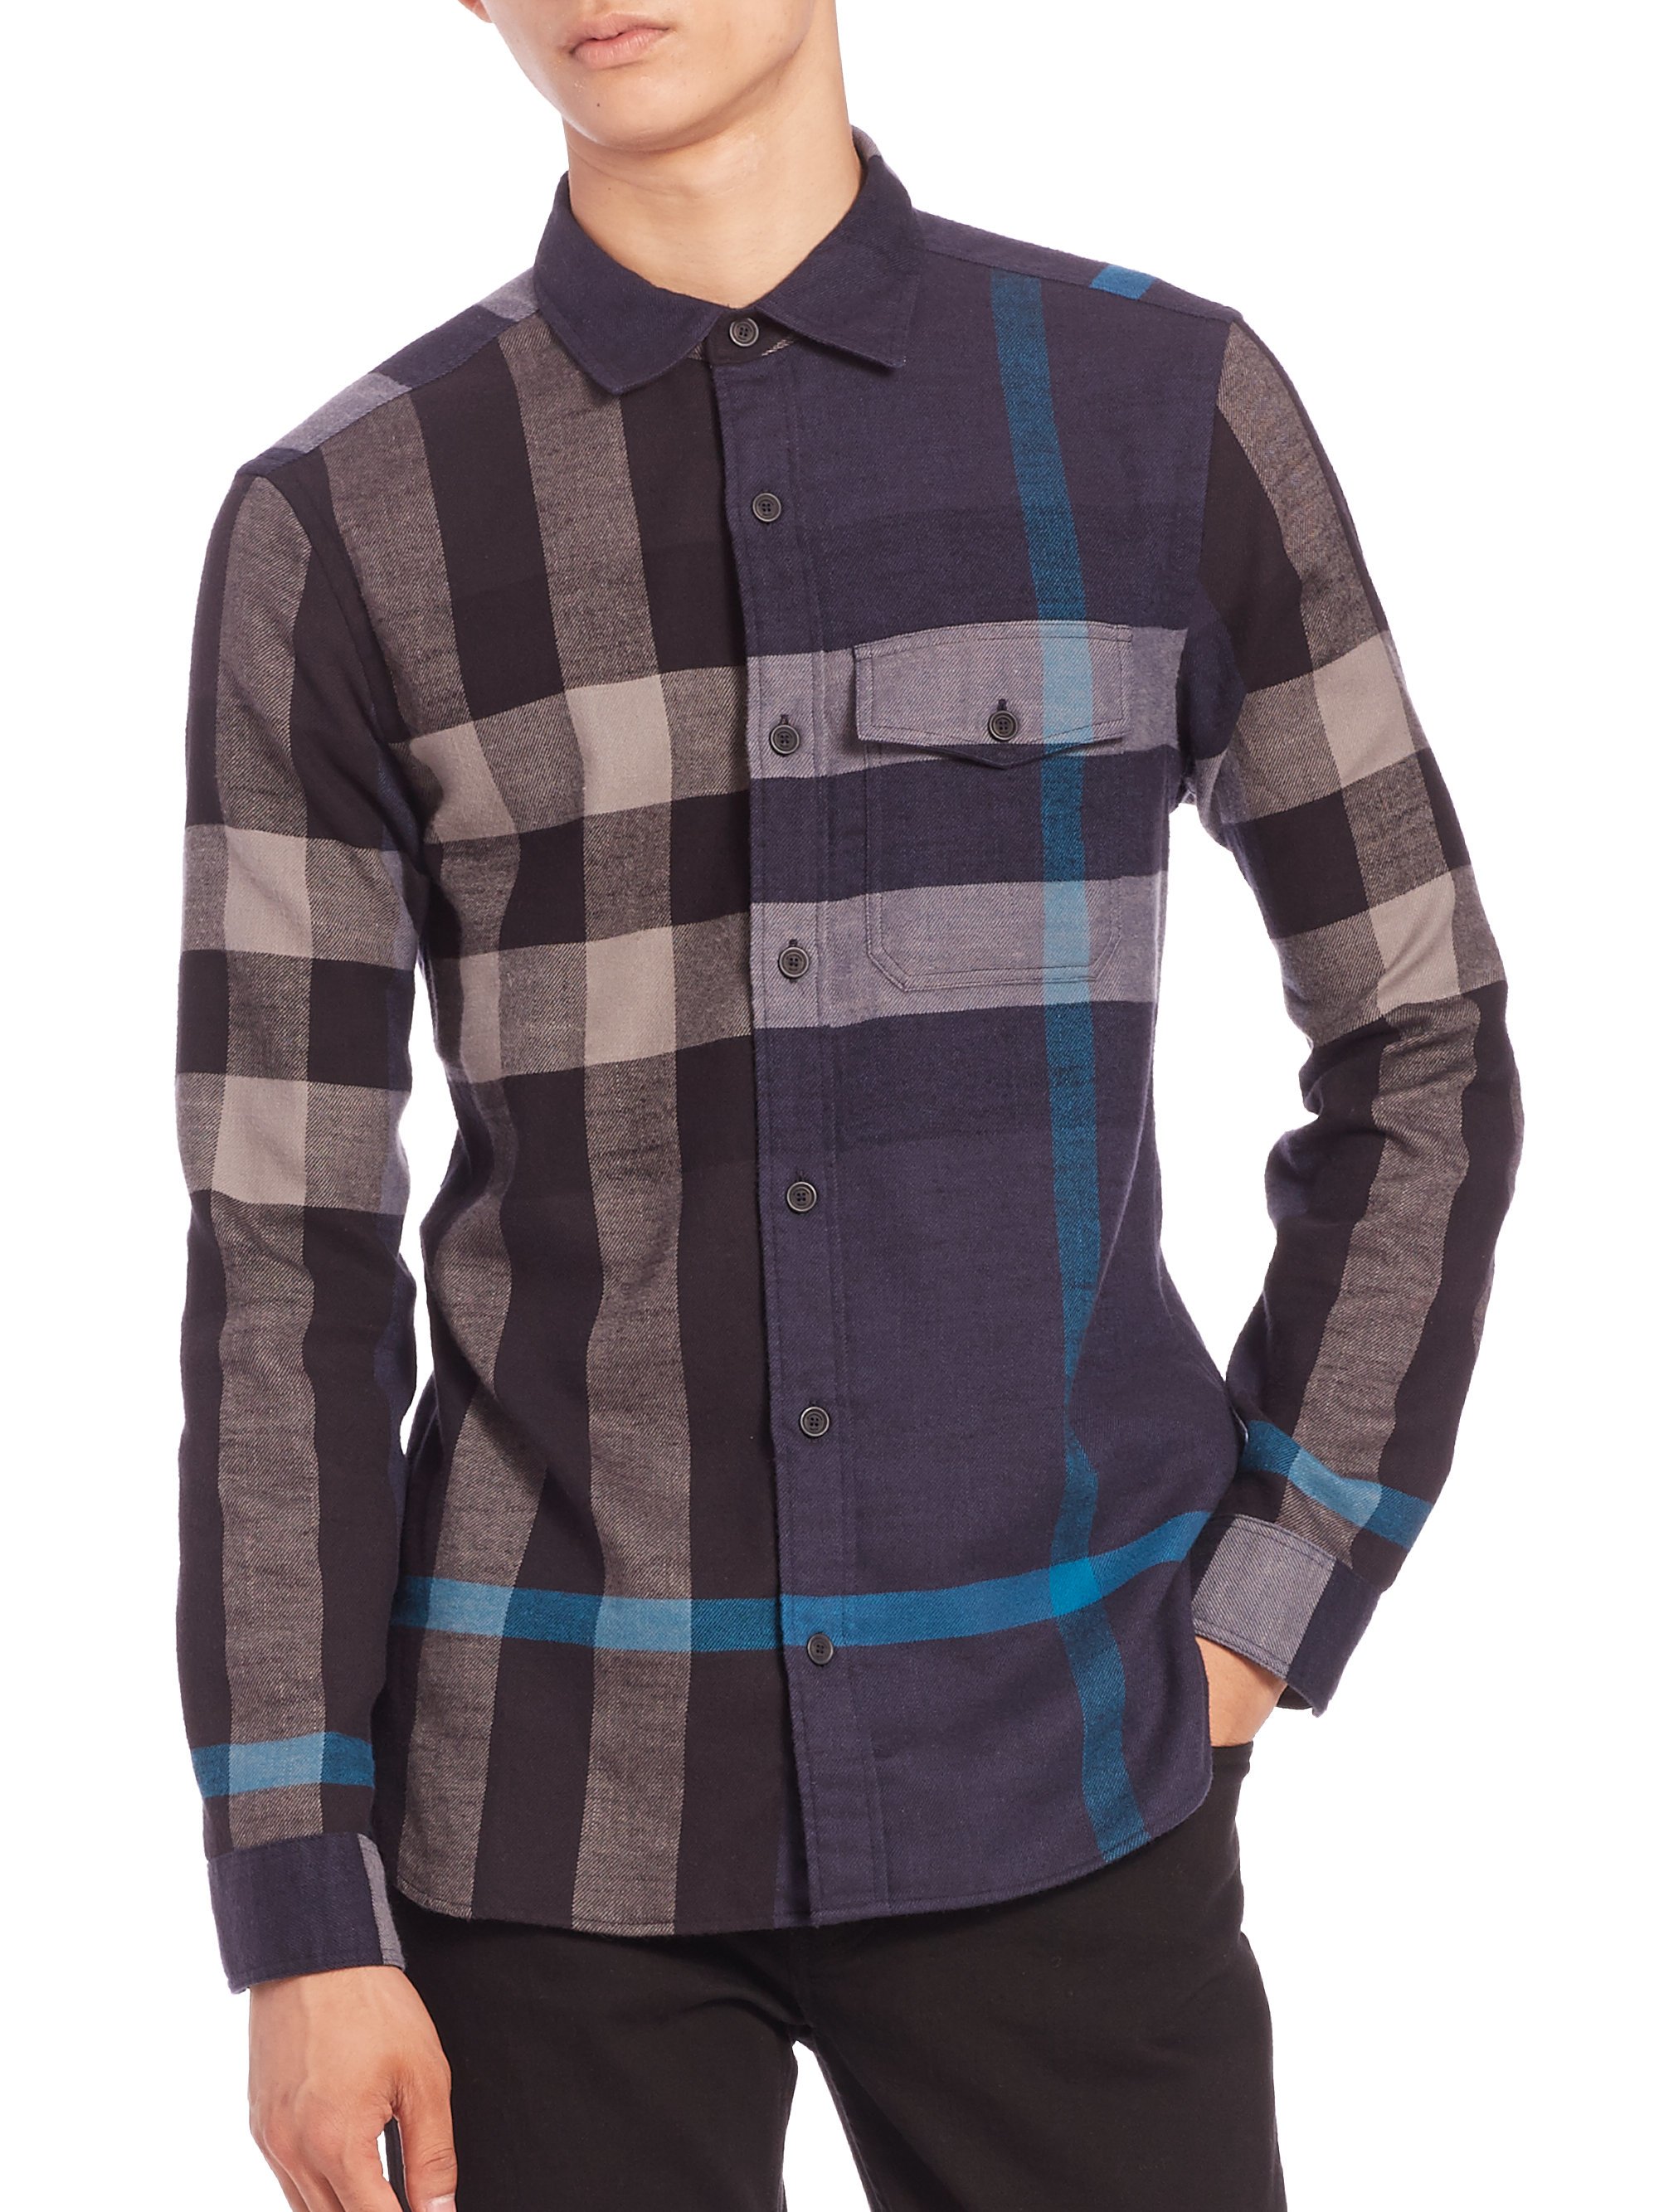 Lyst - Burberry Brit Jamie Checked Cotton Flannel Shirt in Blue for Men